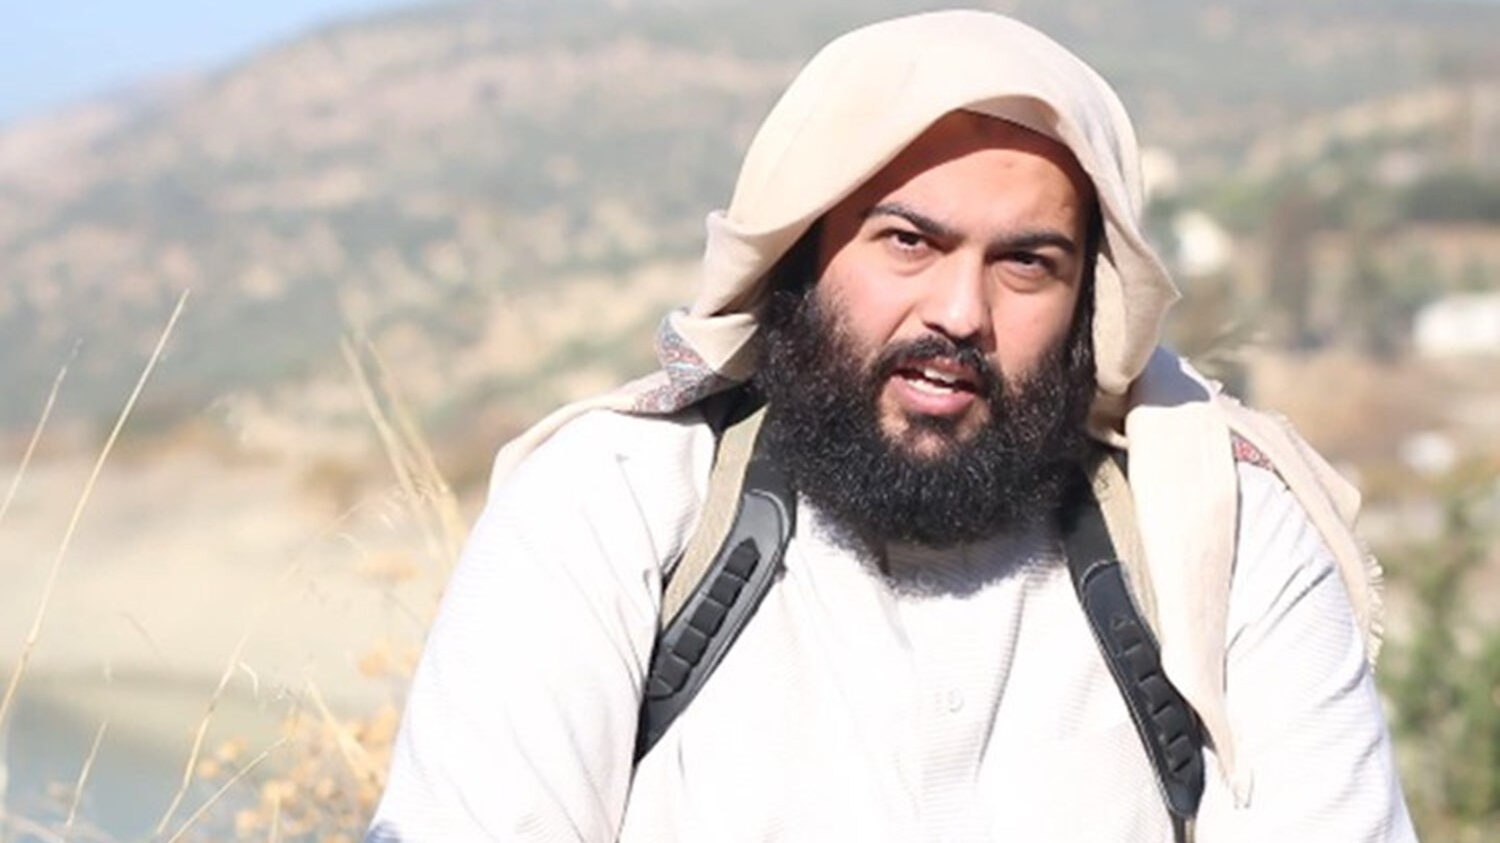 Infamous Saudi Cleric Moved Out From Syria’s Greater Idlib - Reports